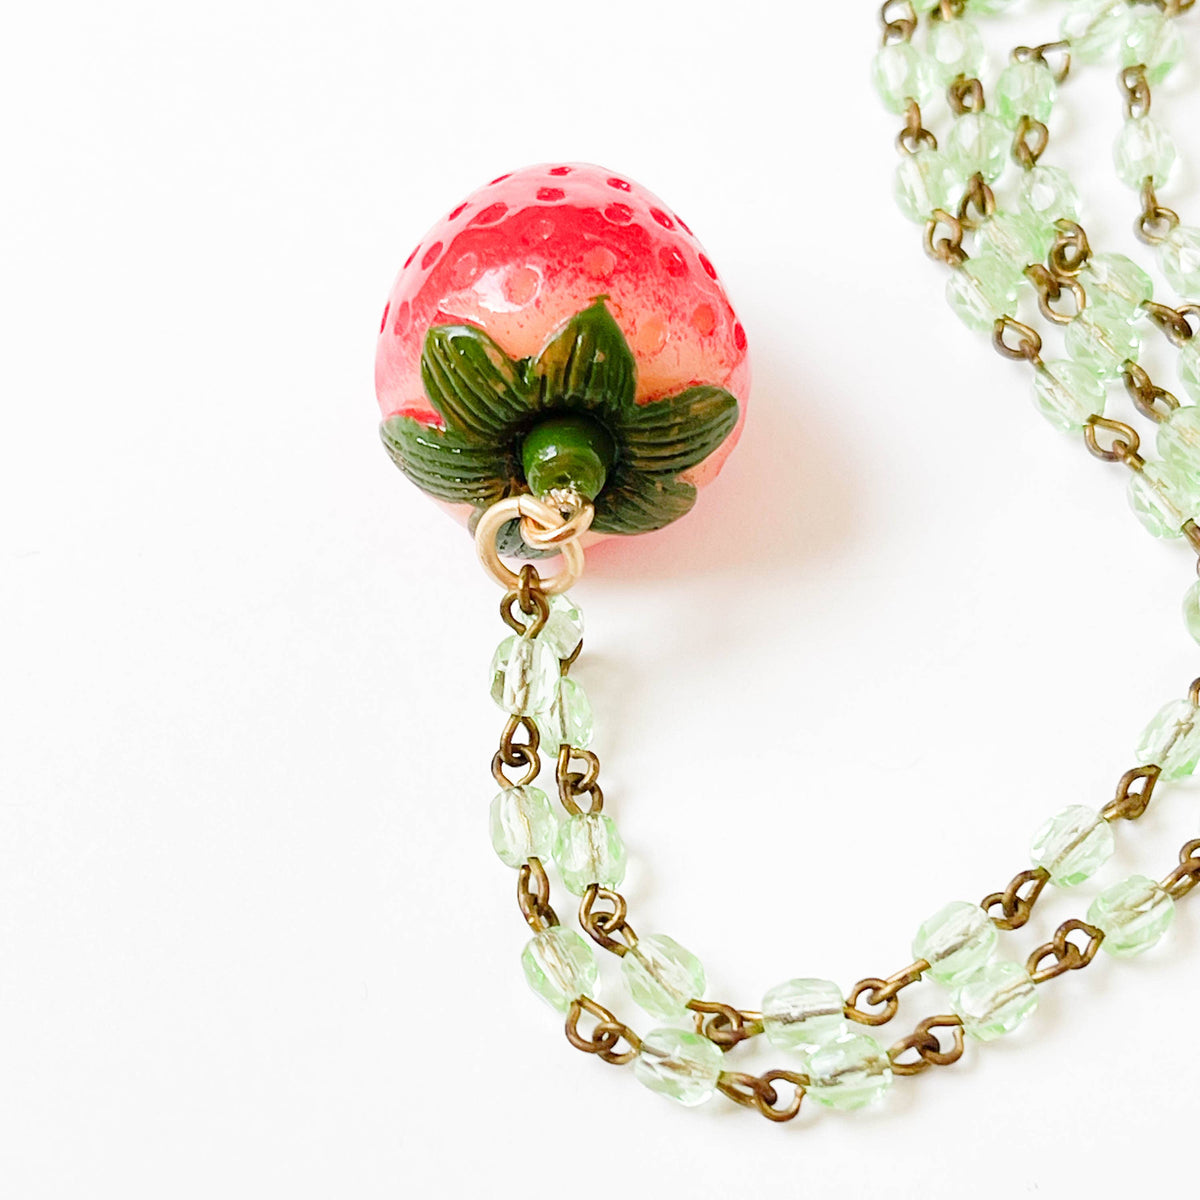 Strawberry Charm Necklace with Green Beads